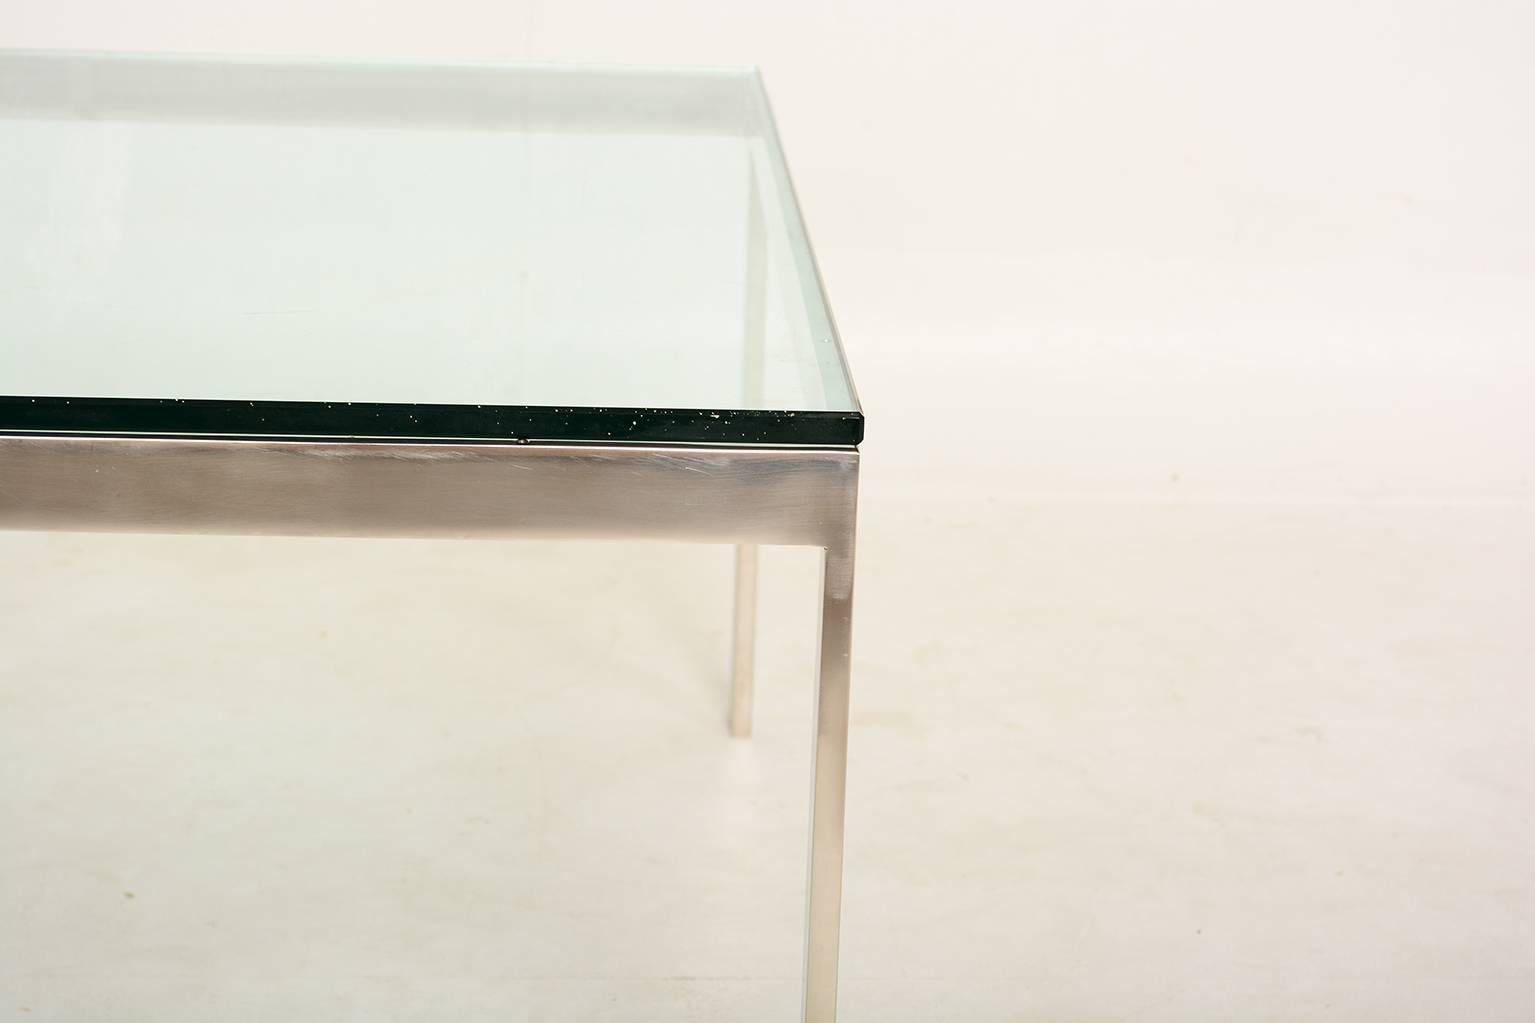 For your consideration a coffee table constructed with solid stainless steel and glass top. 

Seamless joints with original 1/2 glass top. Glass has beveled edges. 

No markings present from the maker.
